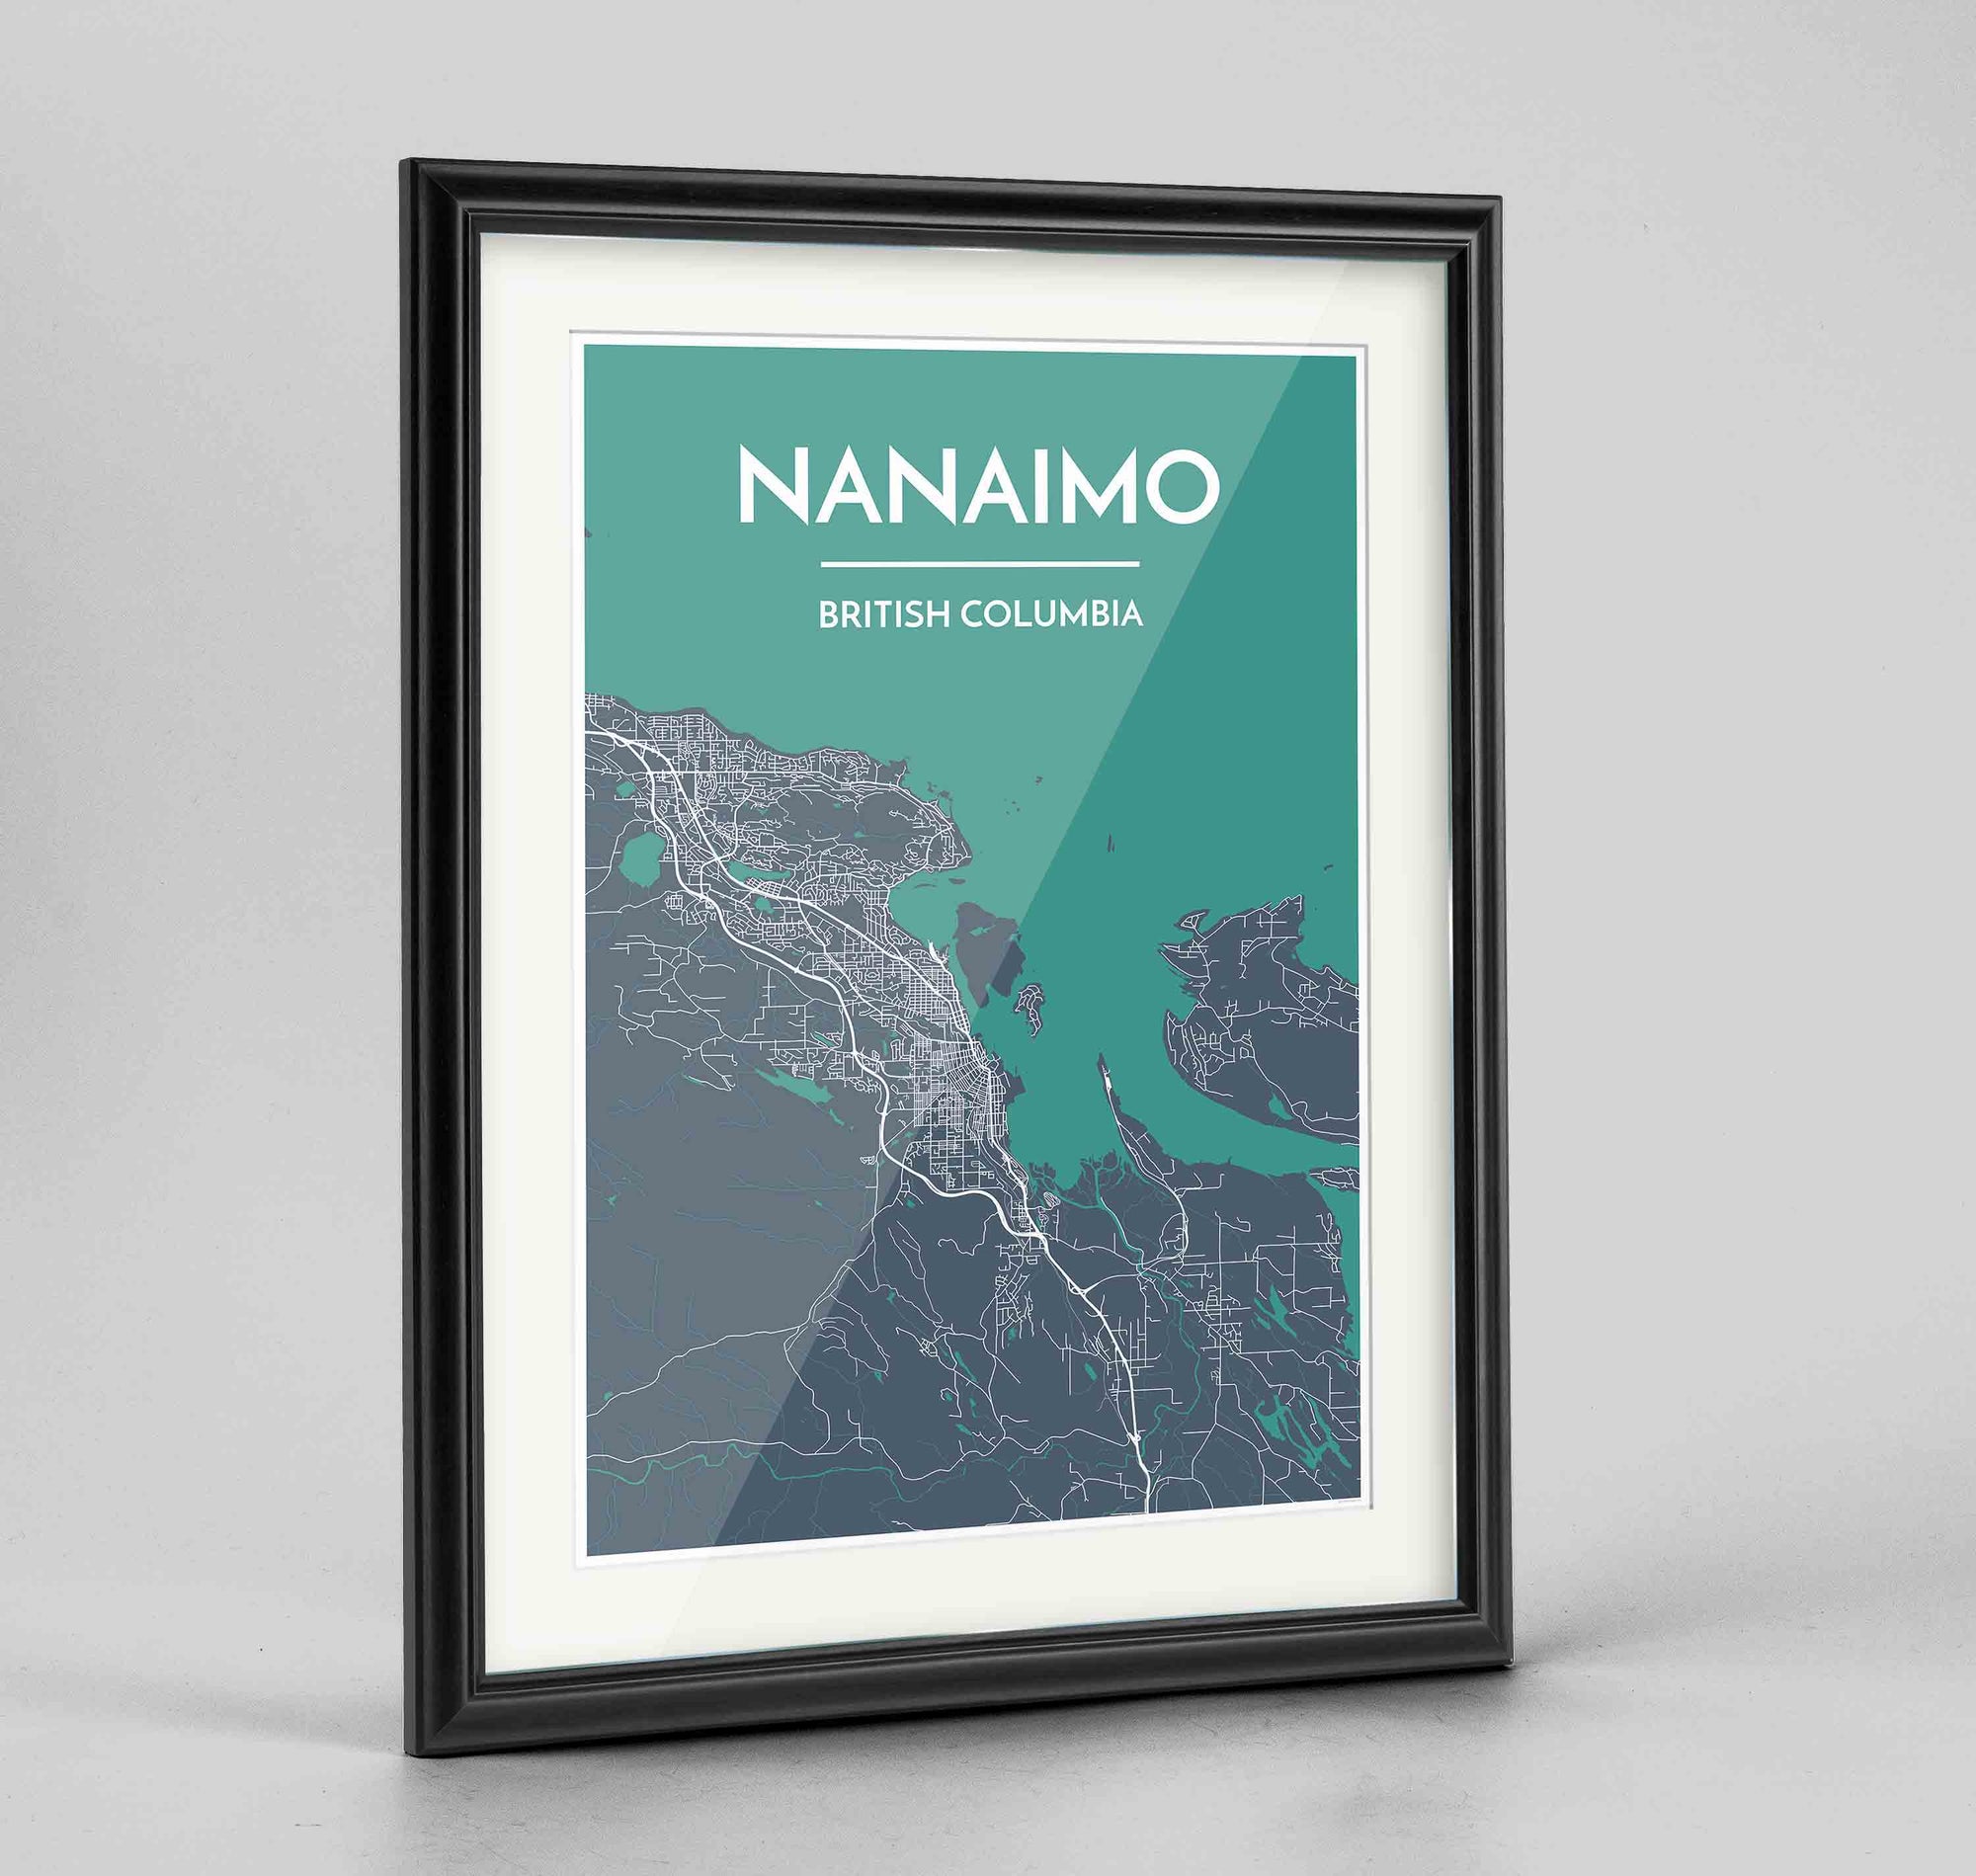 Framed Nanaimo City Map Art Print 24x36" Traditional Black frame Point Two Design Group